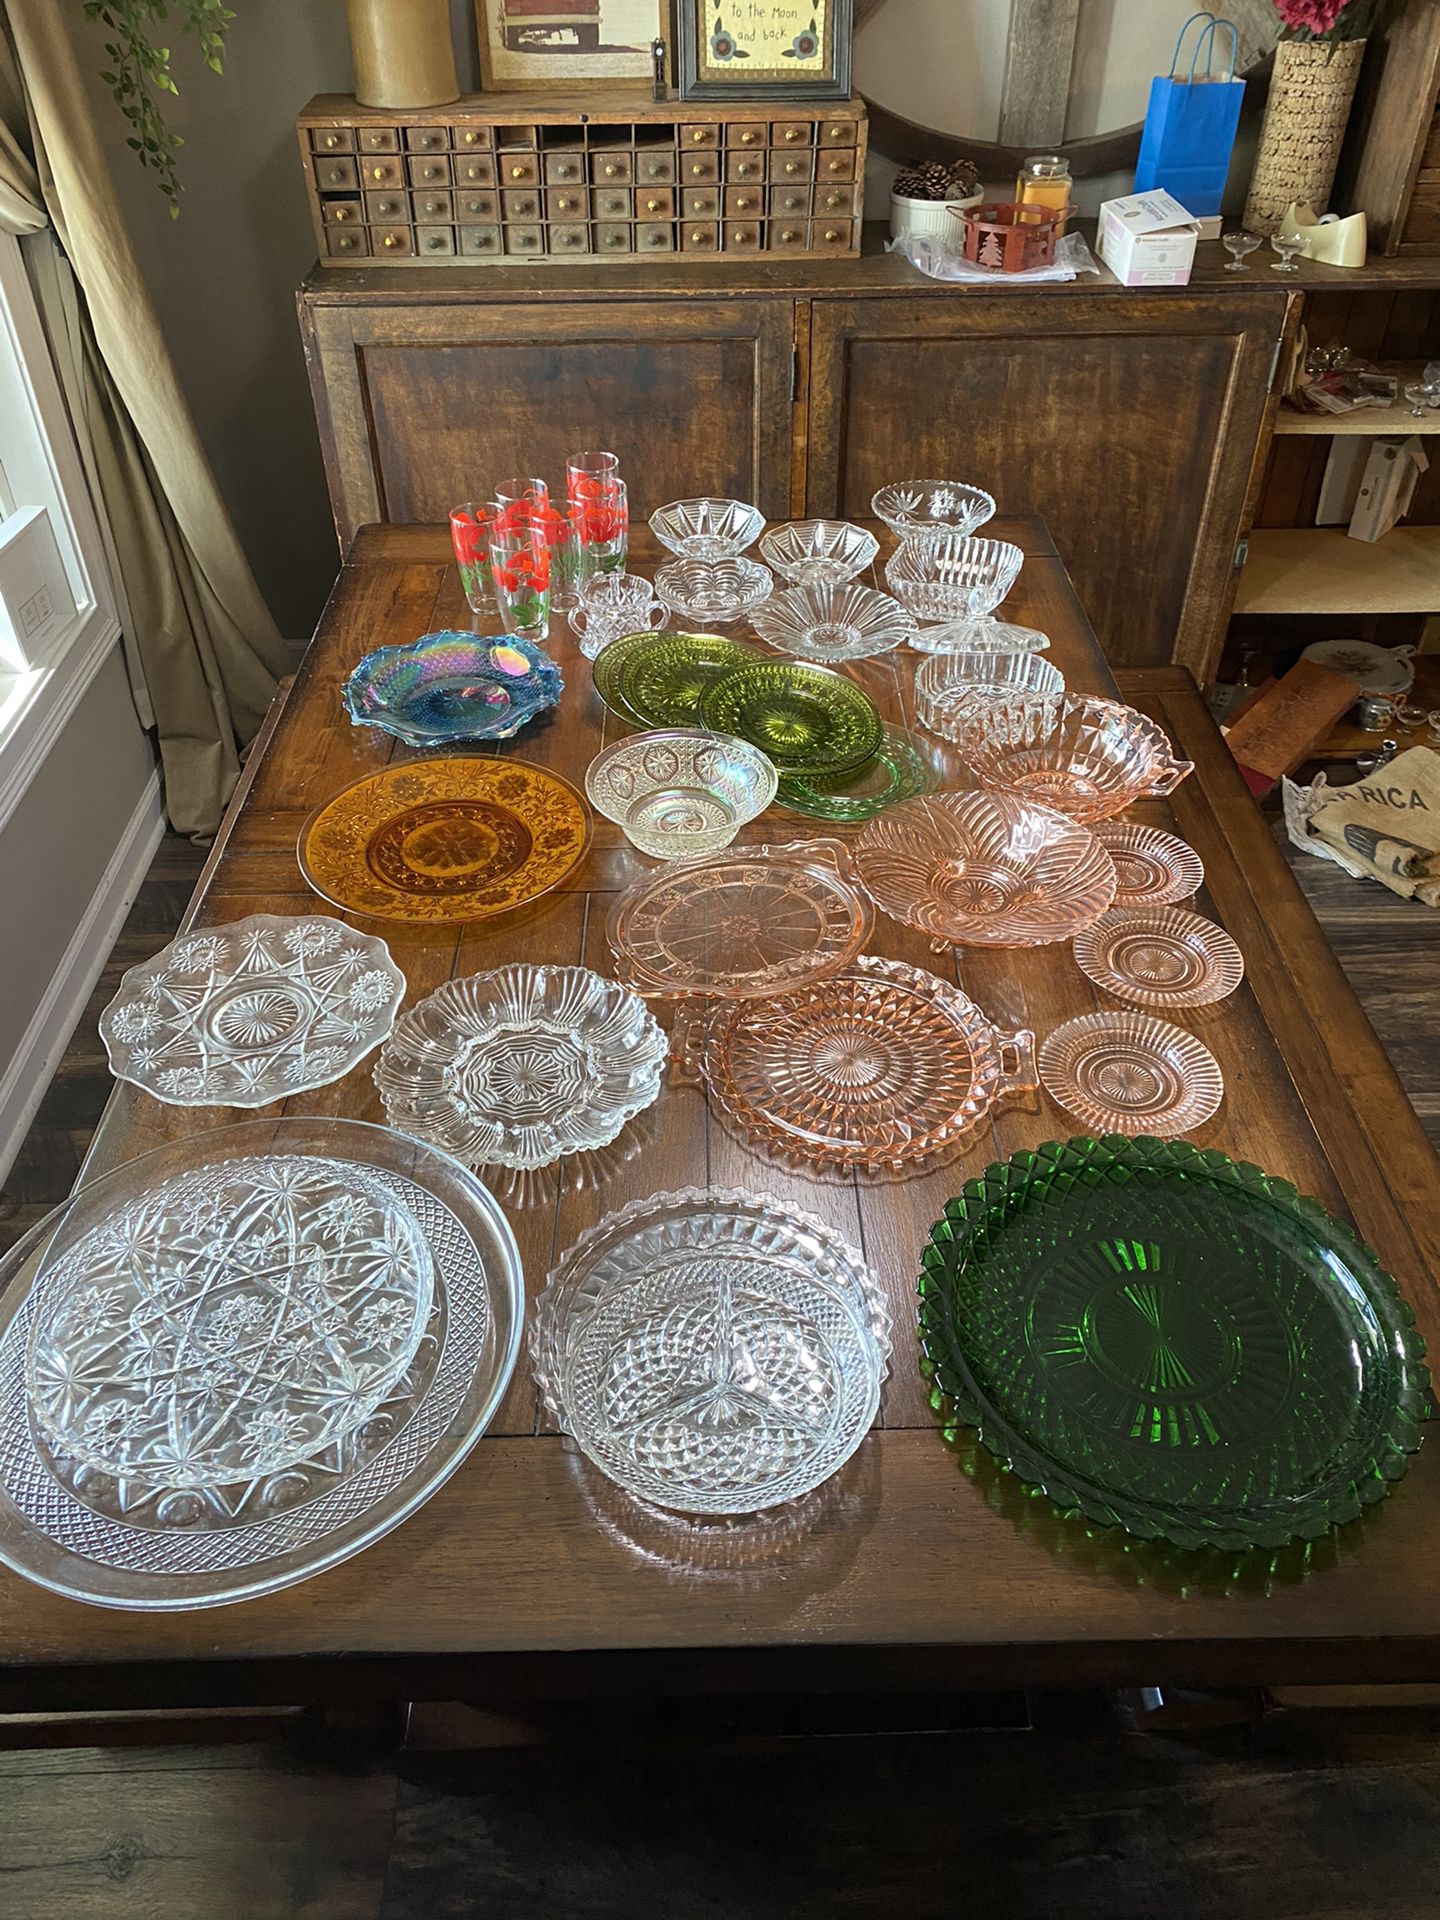 I have a ton of antique China would love to get rid of it all together I don’t have the time to look up what it’s worth